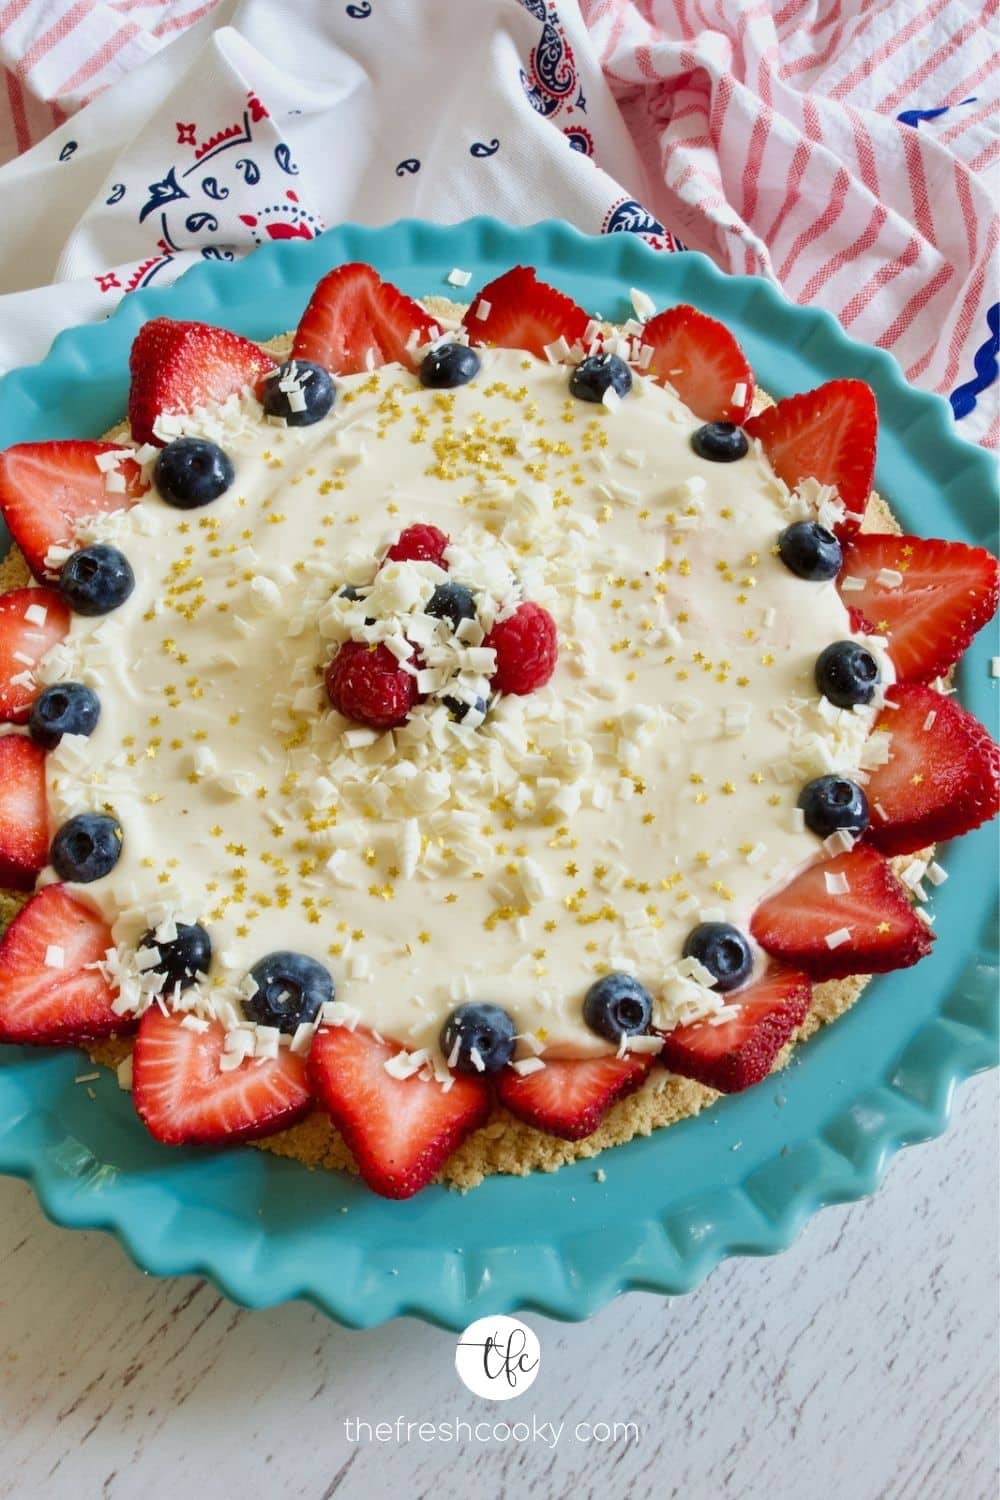 Patriotic Lemon Cream Pie decorated with sliced strawberries and blueberries and shaved chocolate with edible gold stars.